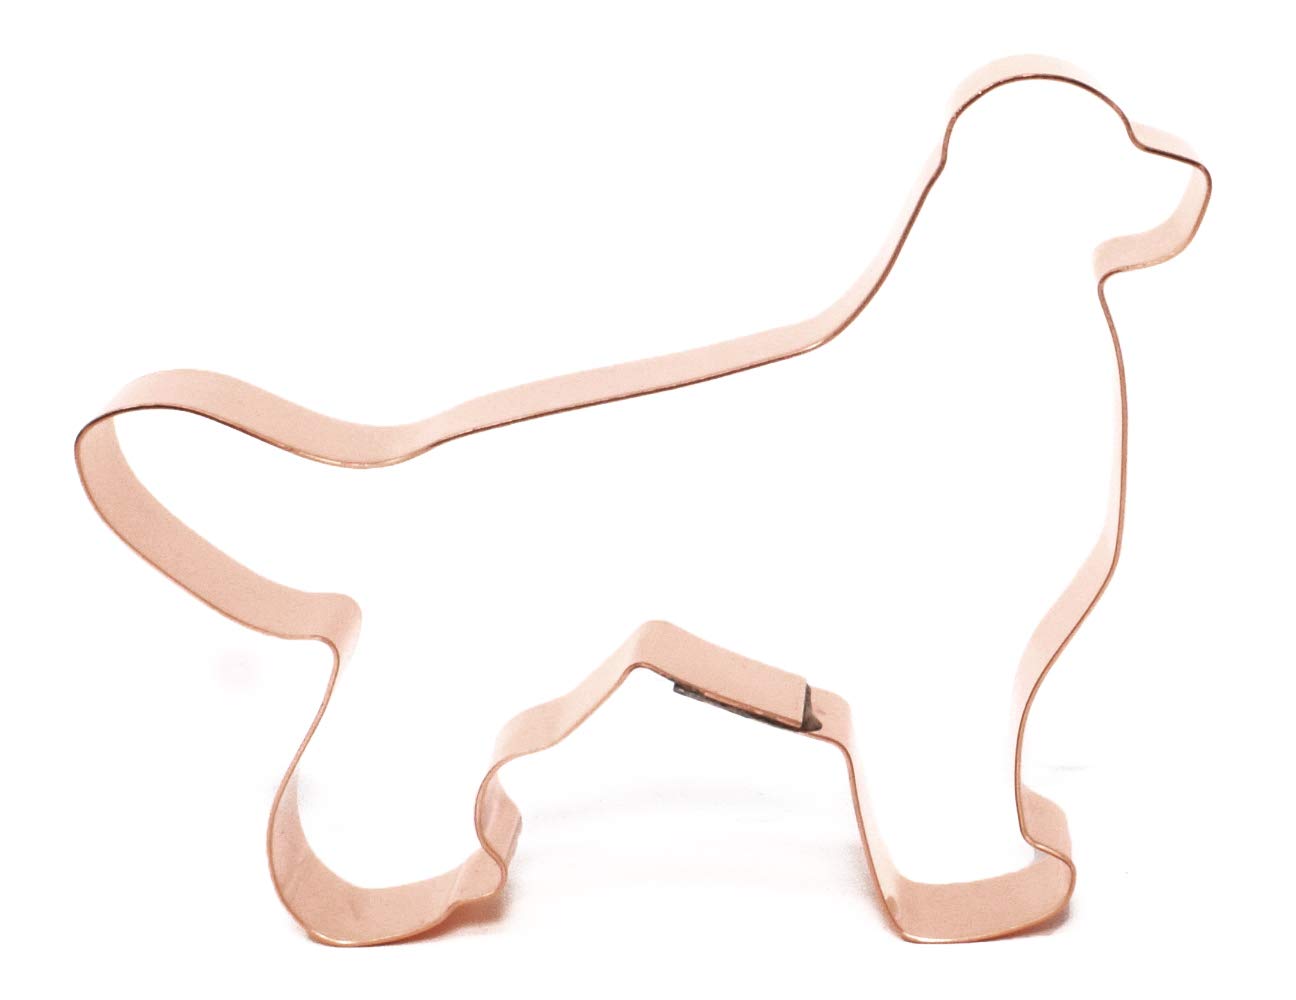 Golden Retriever Dog Breed Cookie Cutter 4.75 X 3.5 inches - Handcrafted Copper Cookie Cutter by The Fussy Pup